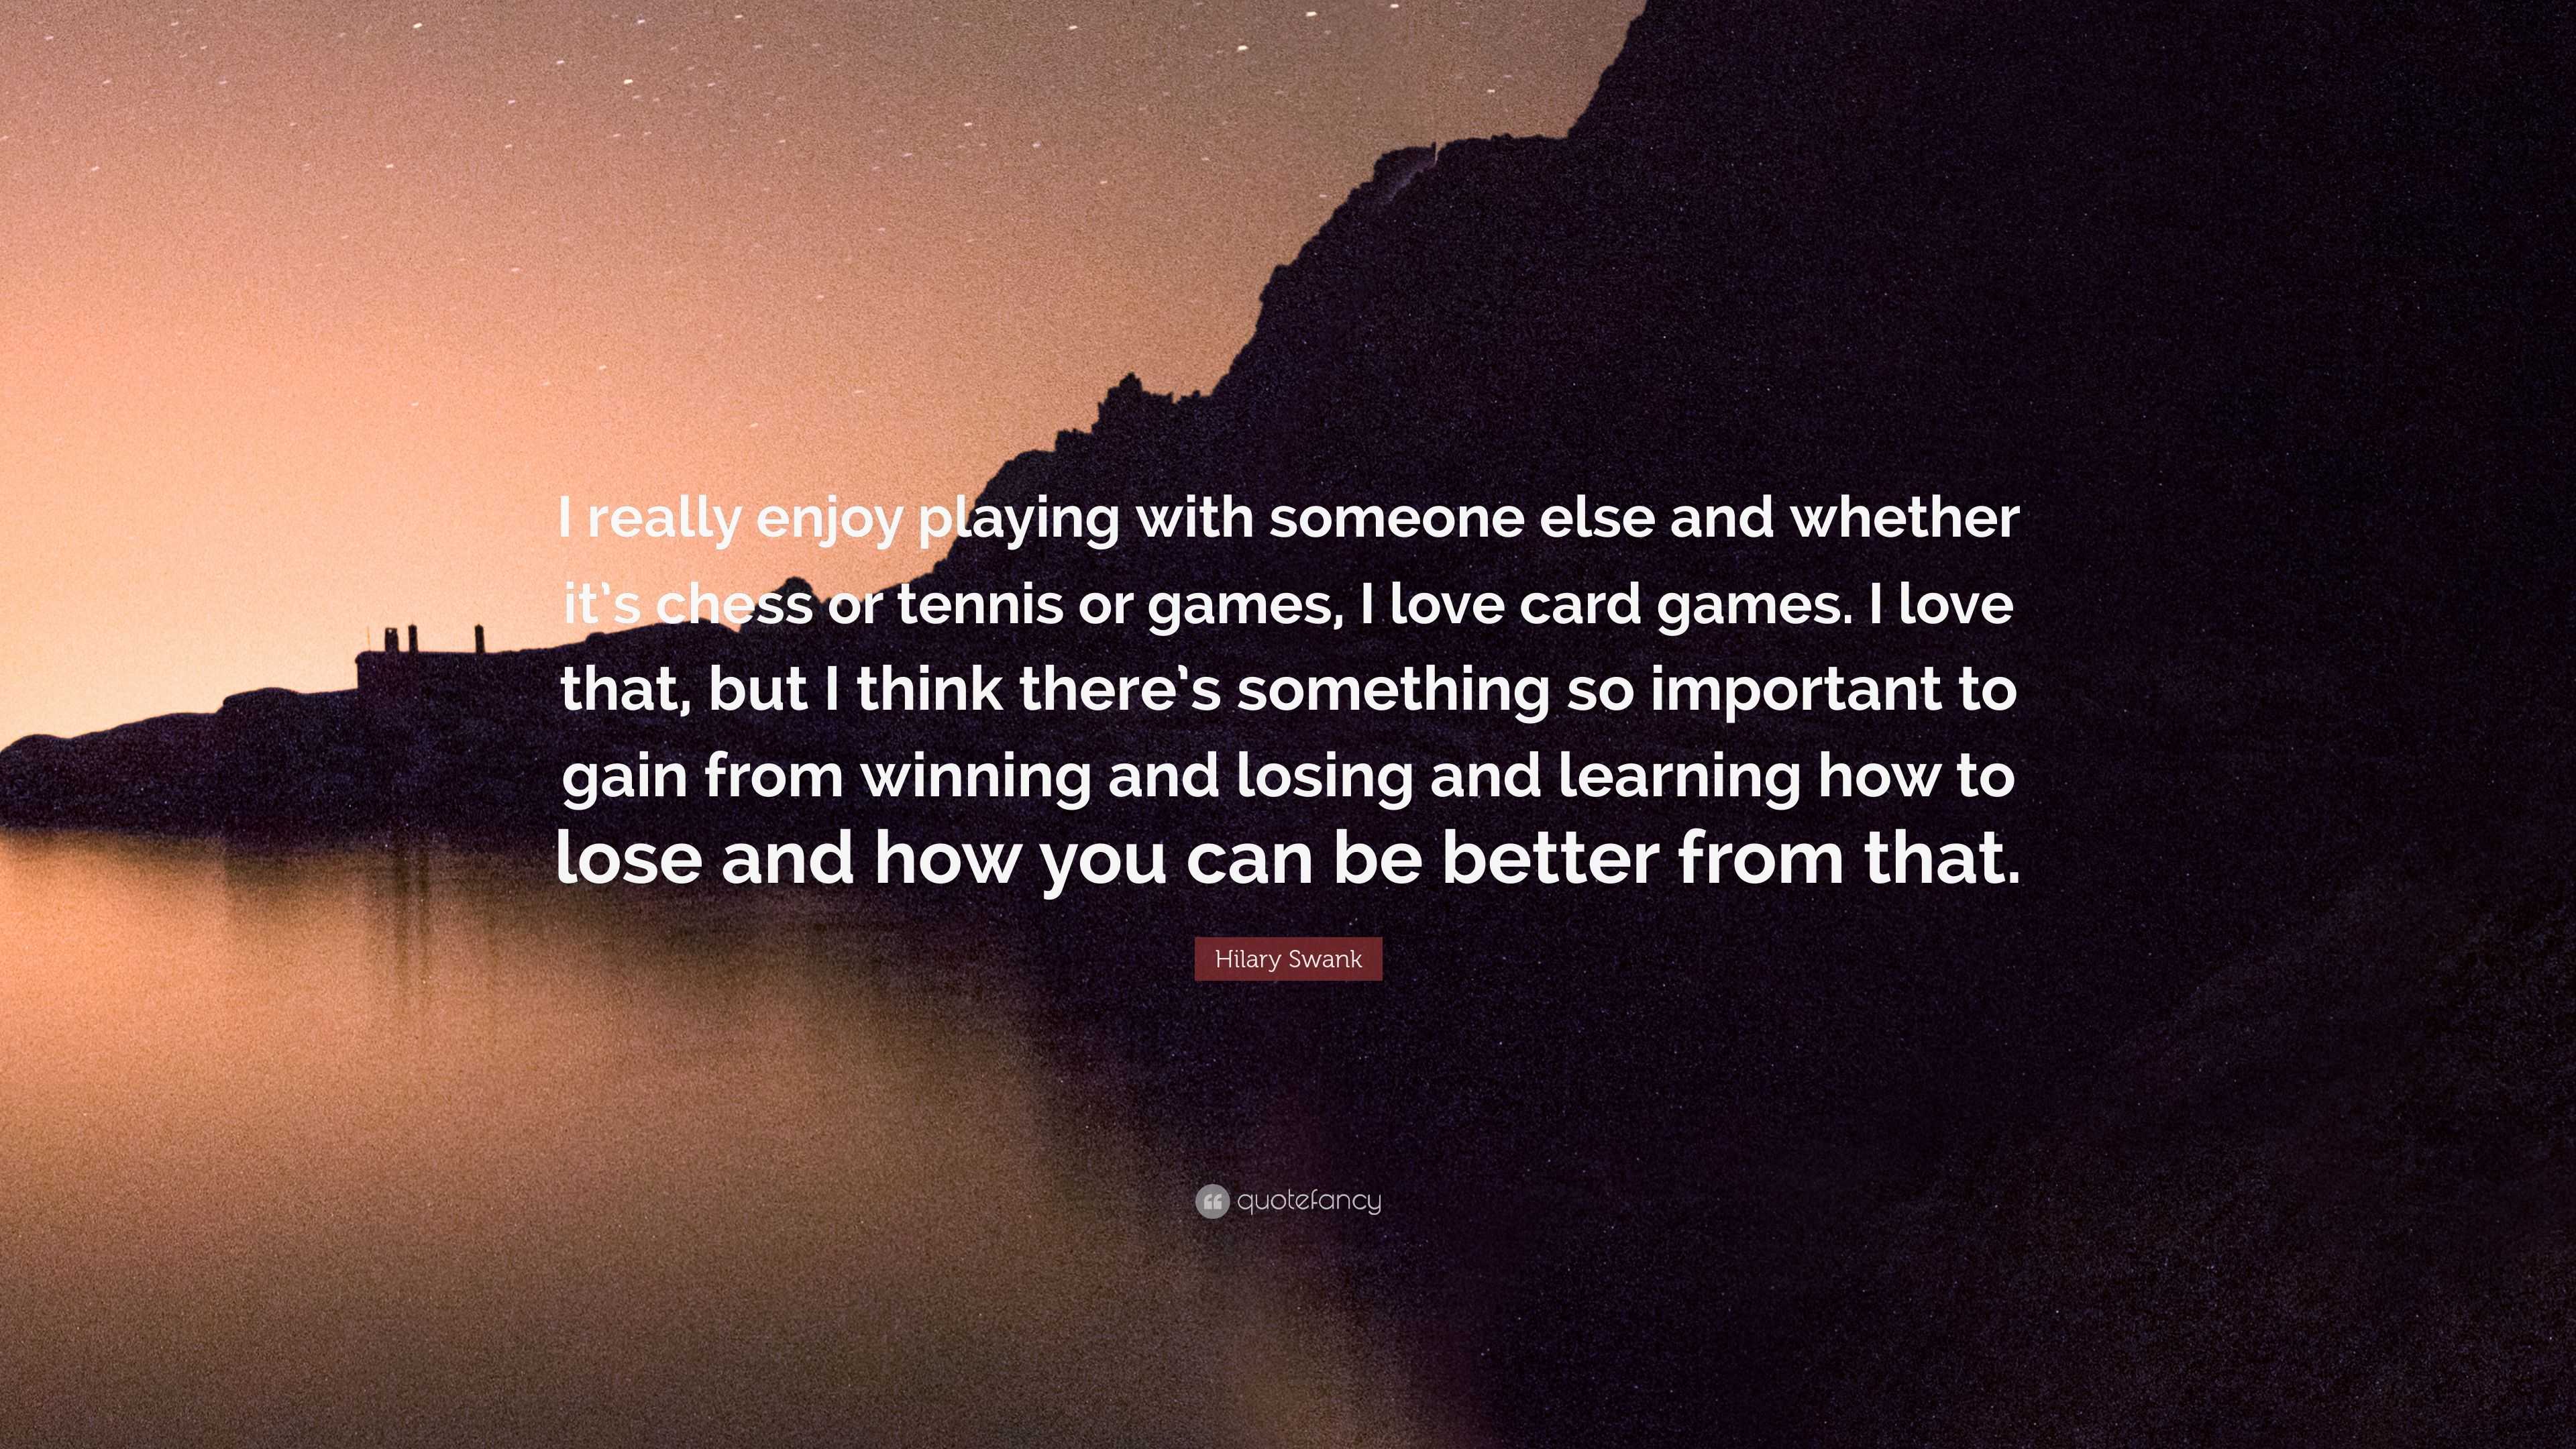 Hilary Swank Quote: “I really enjoy playing with someone else and ...